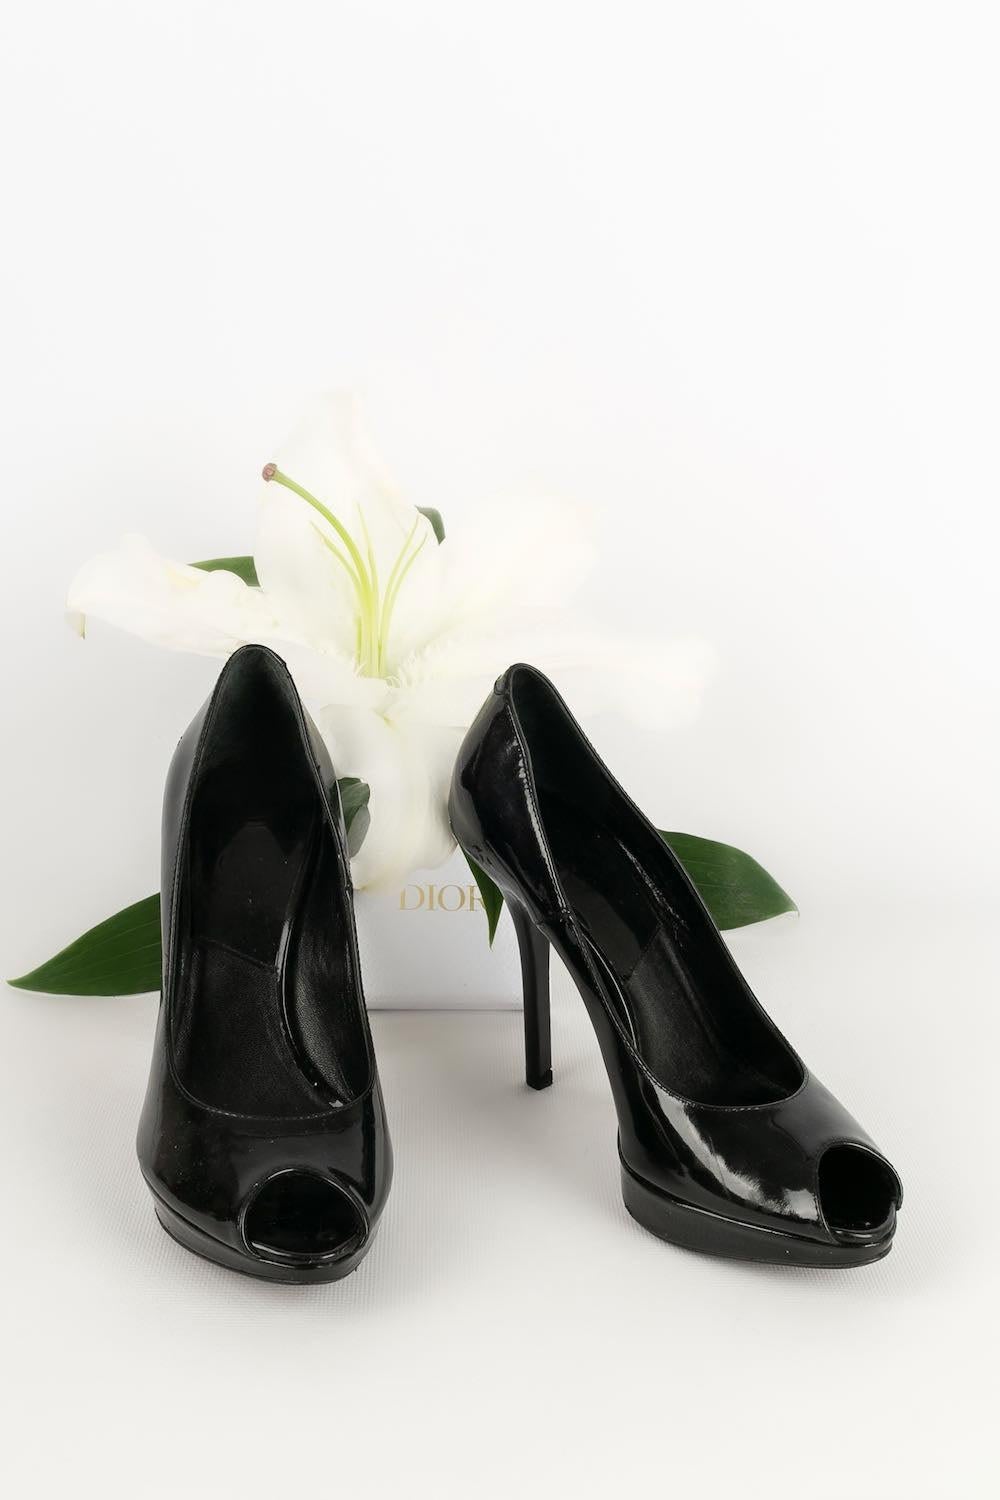 Christian Dior Shoes in Black Patent Leather Pumps For Sale 4